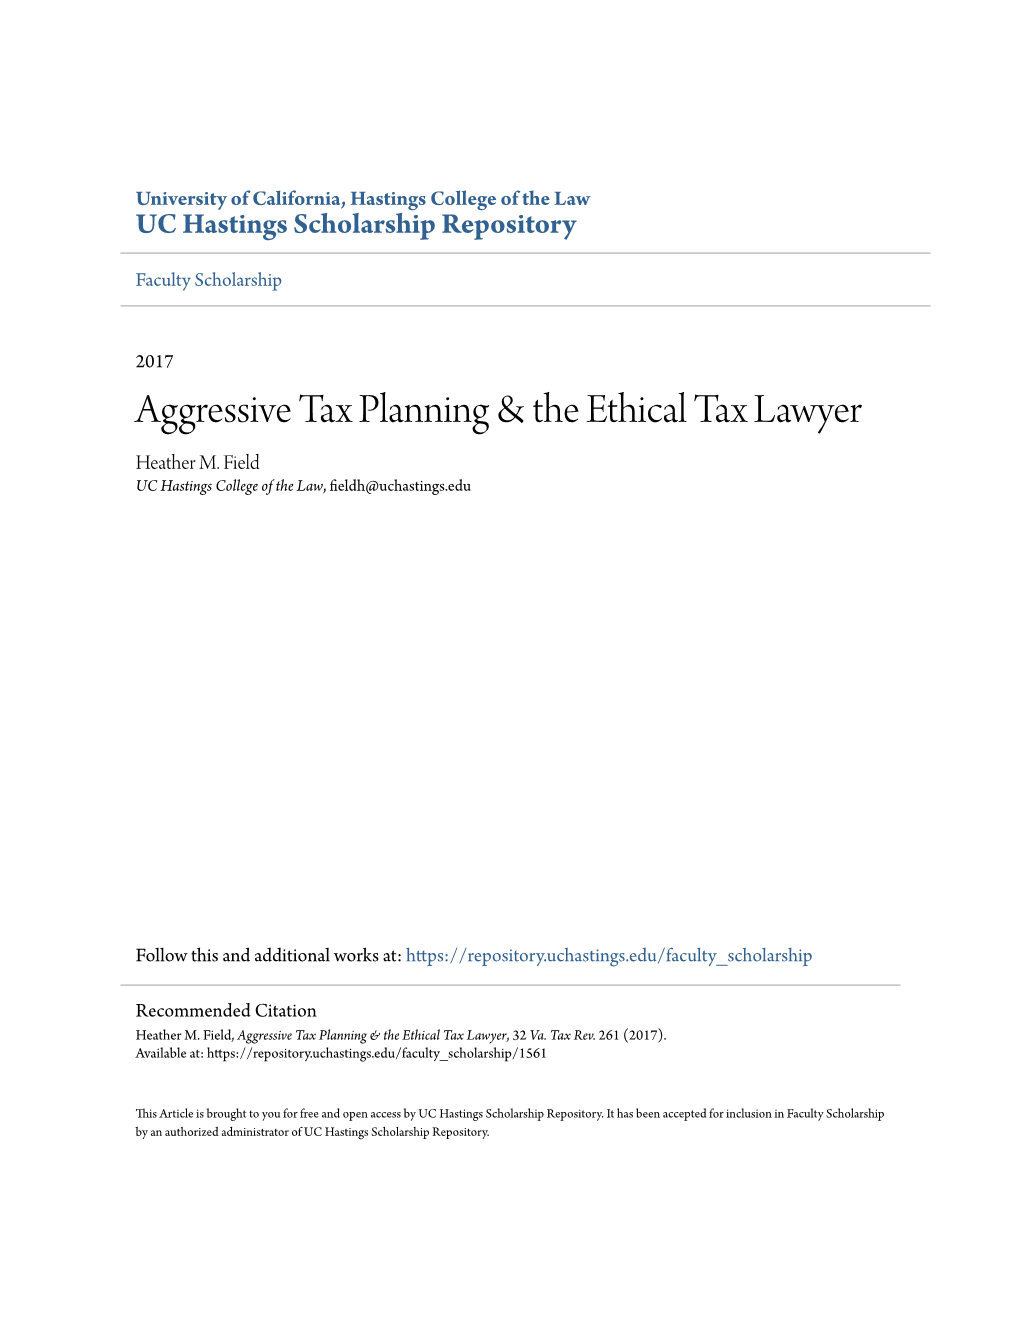 Aggressive Tax Planning & the Ethical Tax Lawyer